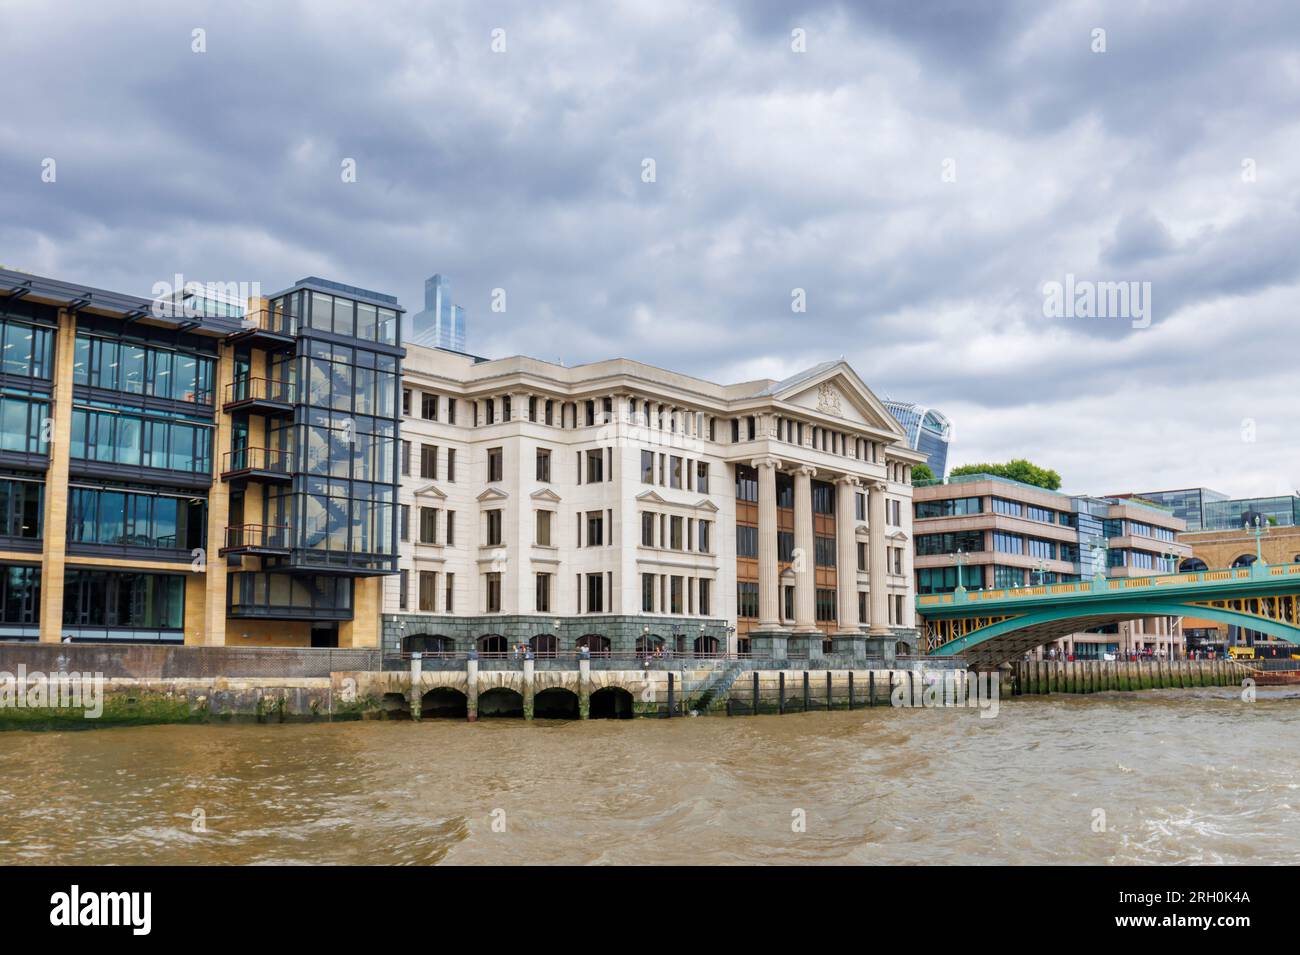 View of the riverside pillared frontage of iconic Vintners' Hall built in 1671, by Southwark Bridge on the north bank of the River Thames, London EC4 Stock Photo